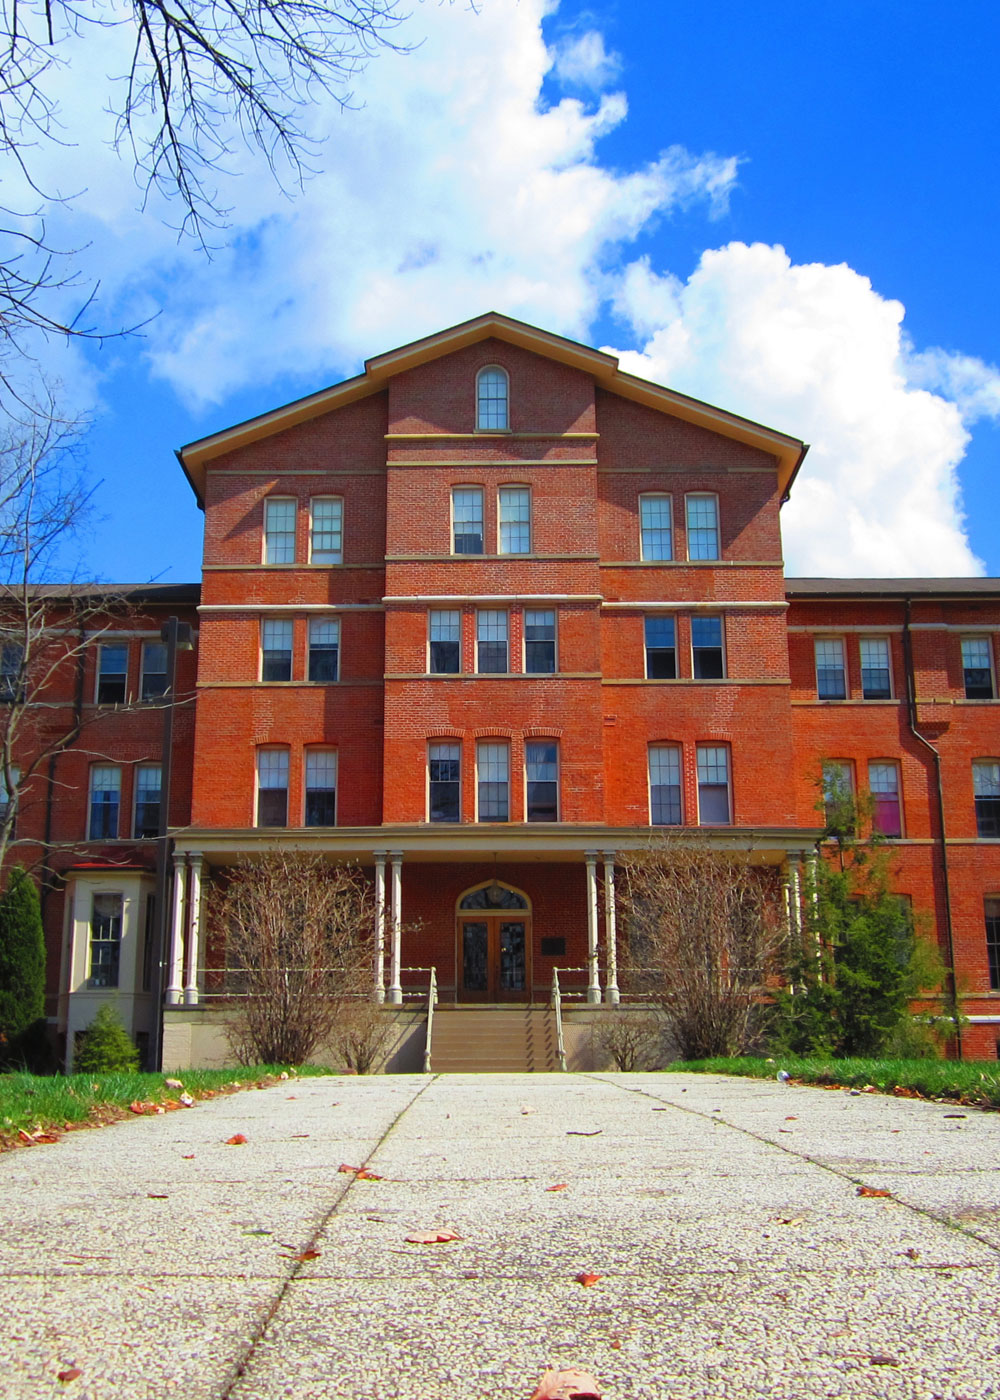 Peabody Hall, a red brick building with steps leading up to the front porch